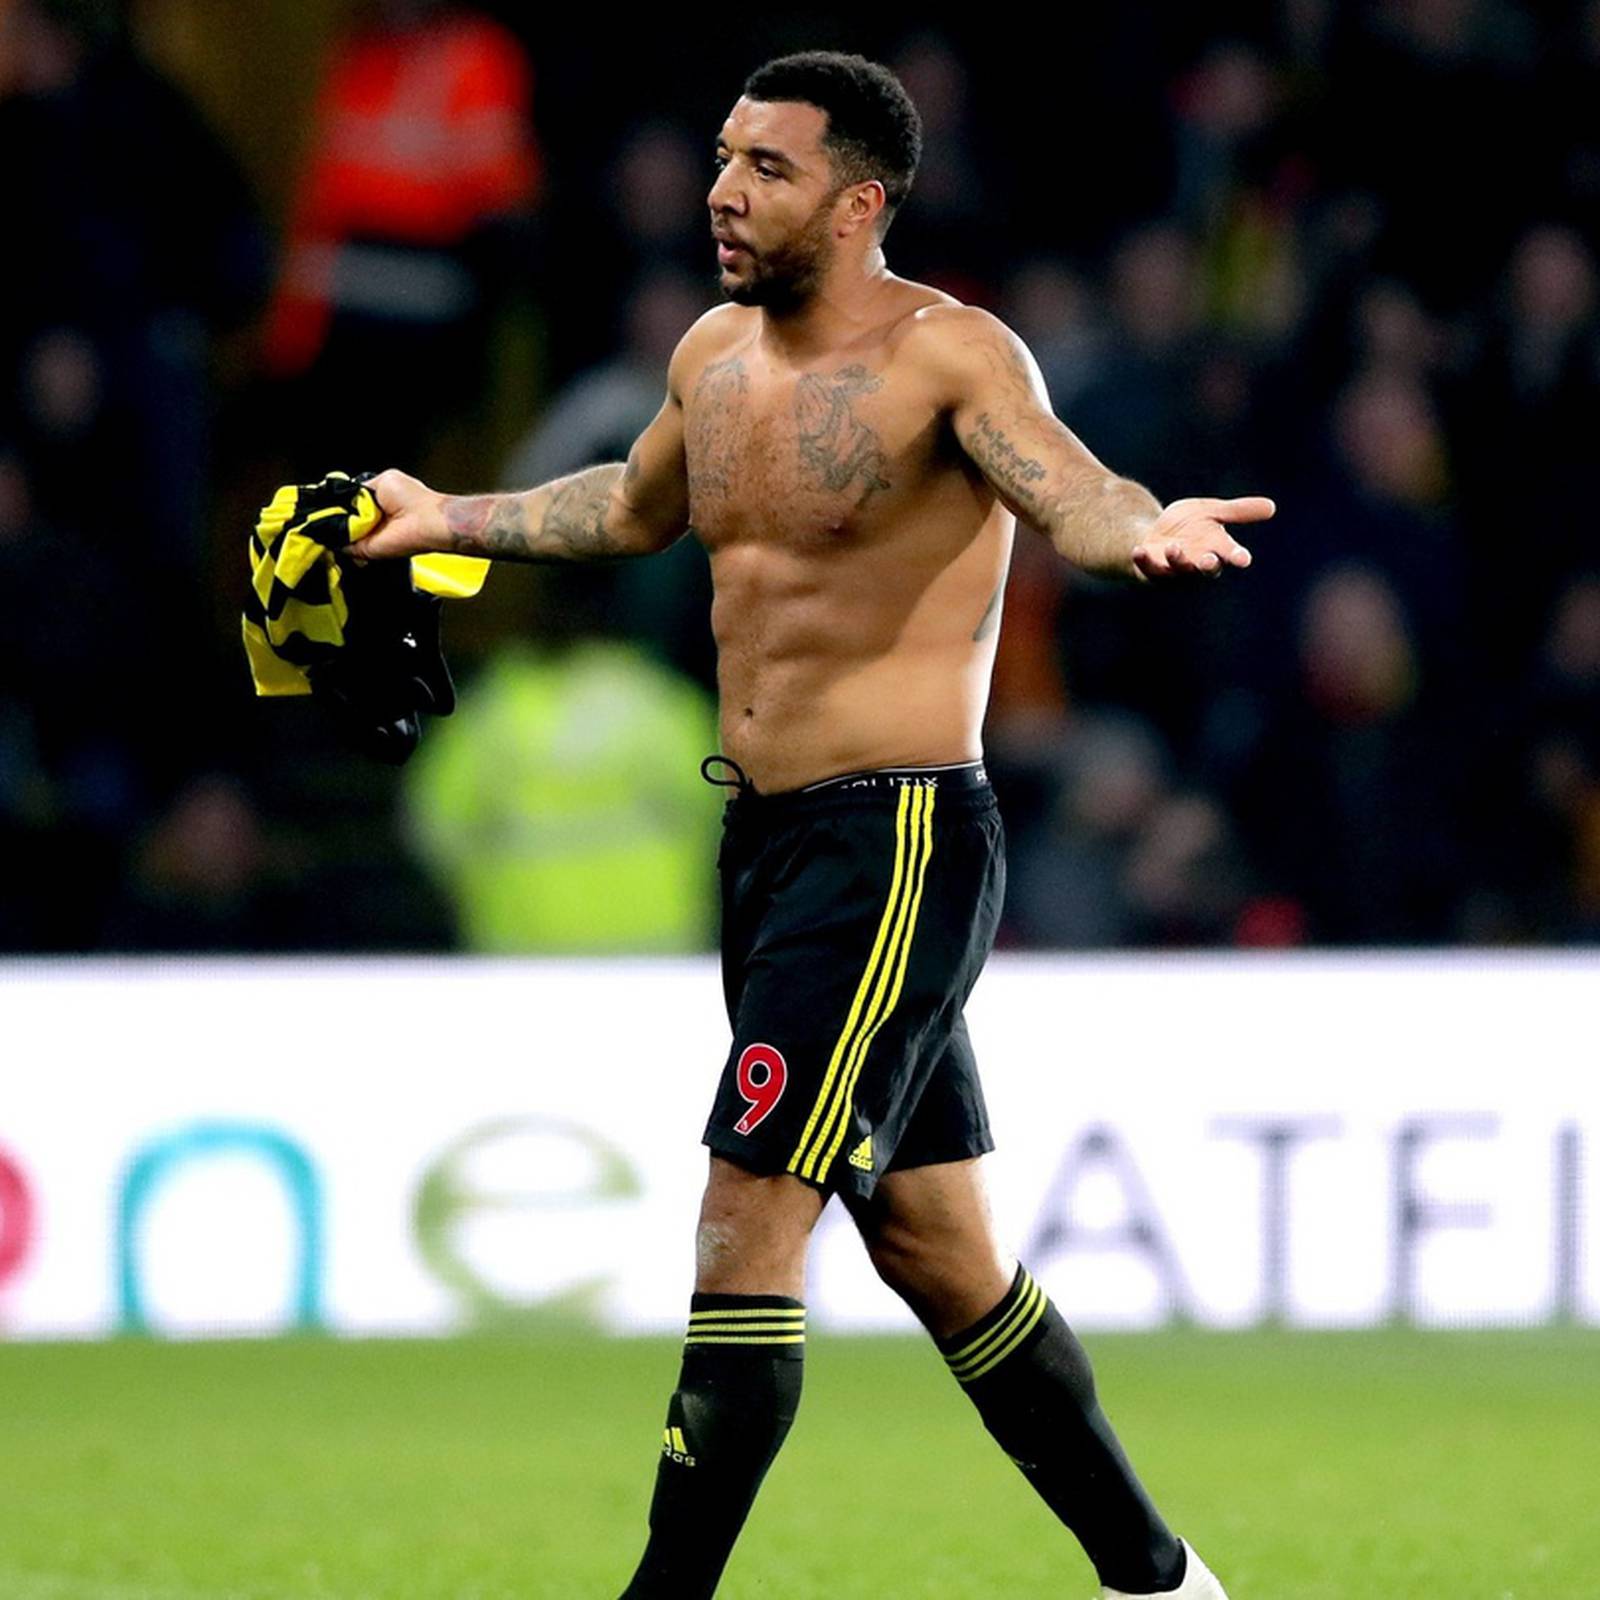 Watford baffled by Deeney red card in Arsenal defeat – The Irish Times